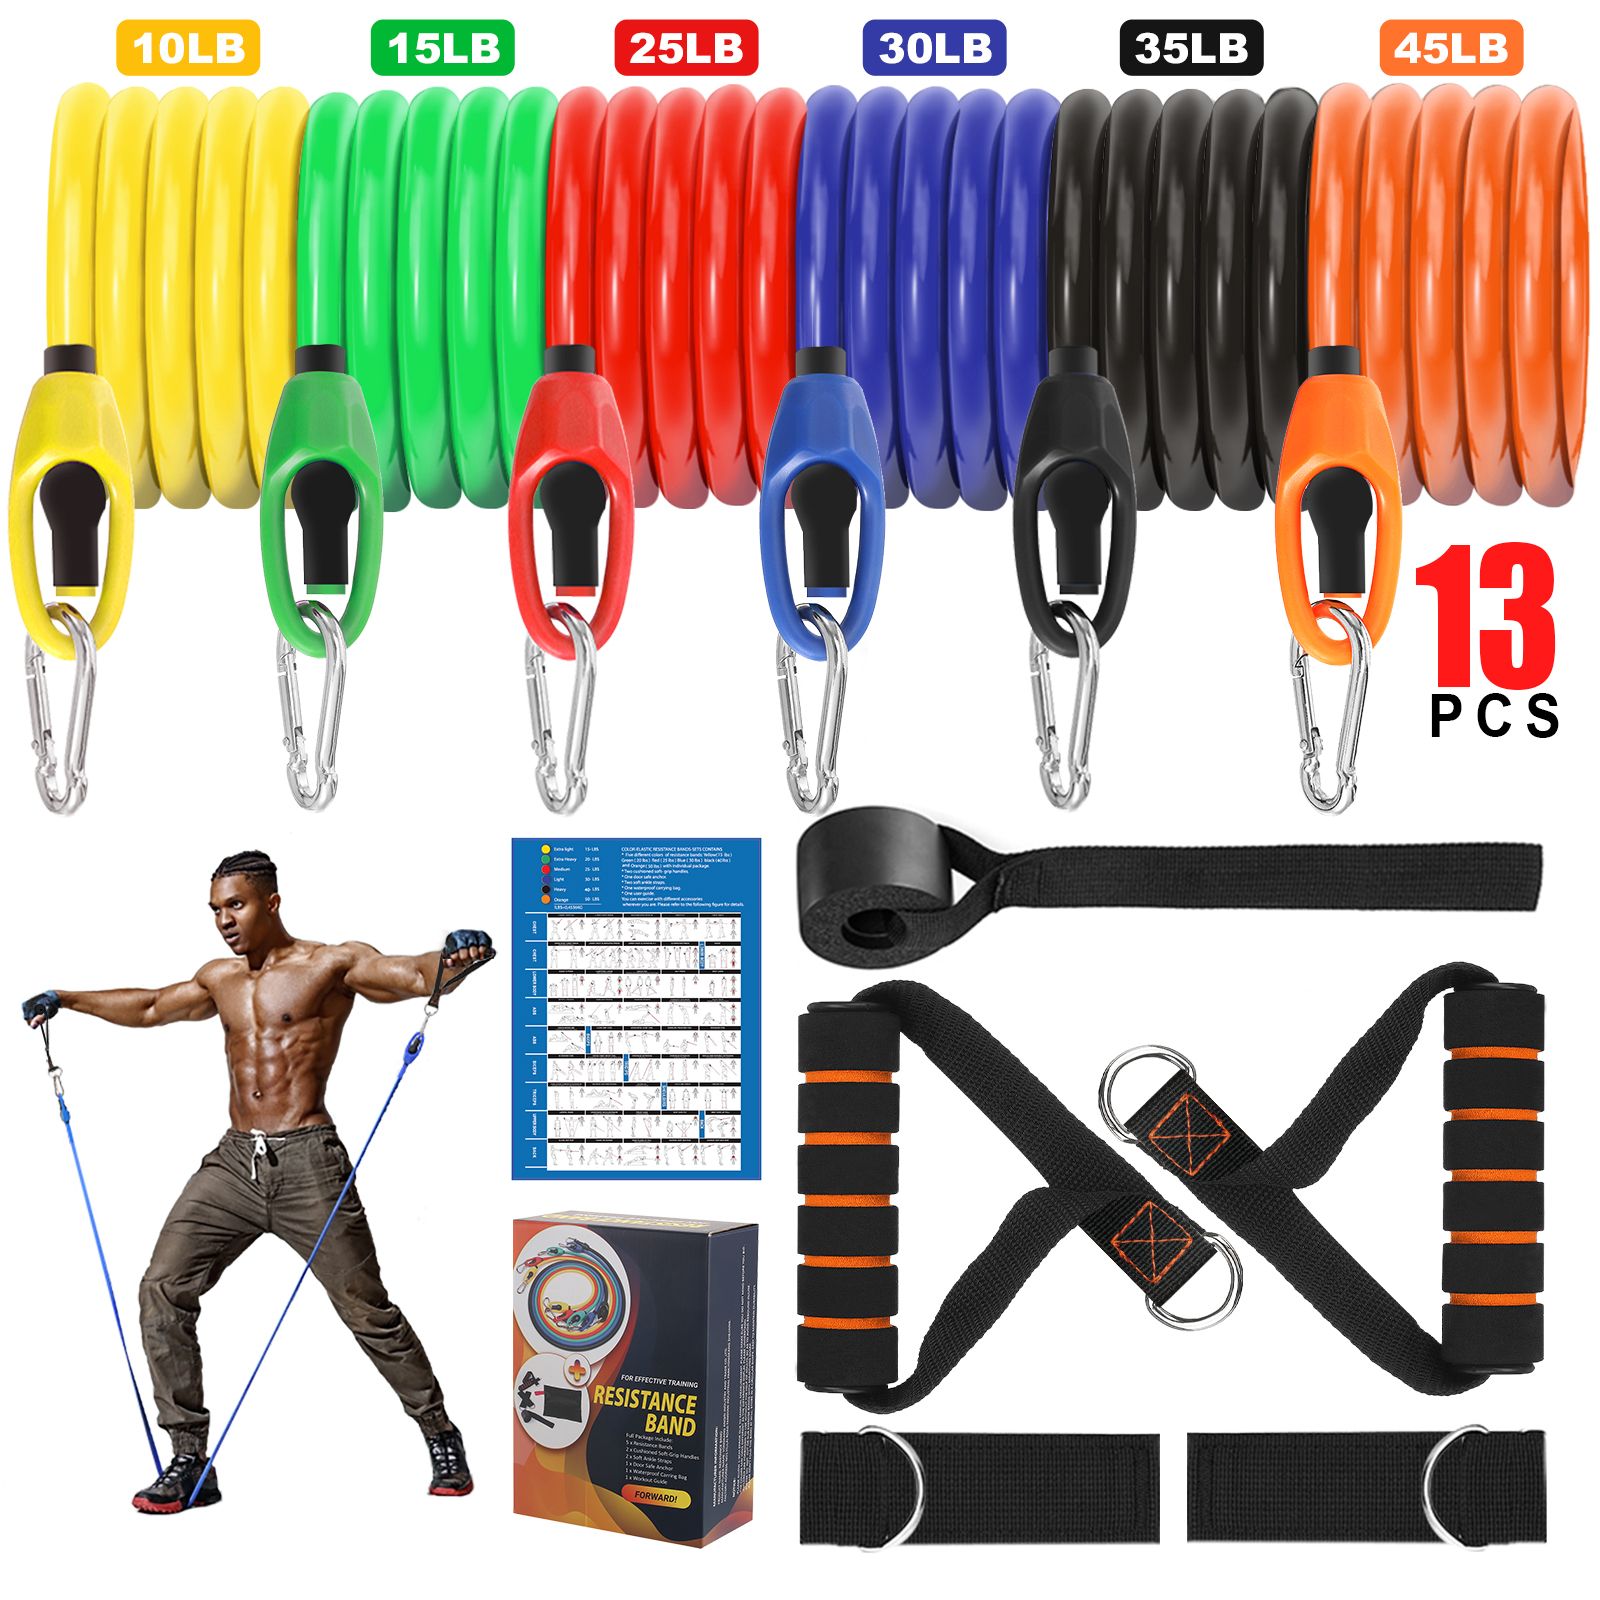 13-Pcs-160lbs-Resistance-Bands-Set-with-Non-Slip-Handle-Door-Anchor-Legs-Ankle-Straps-Fitness-Gym-Mu-1894516-1